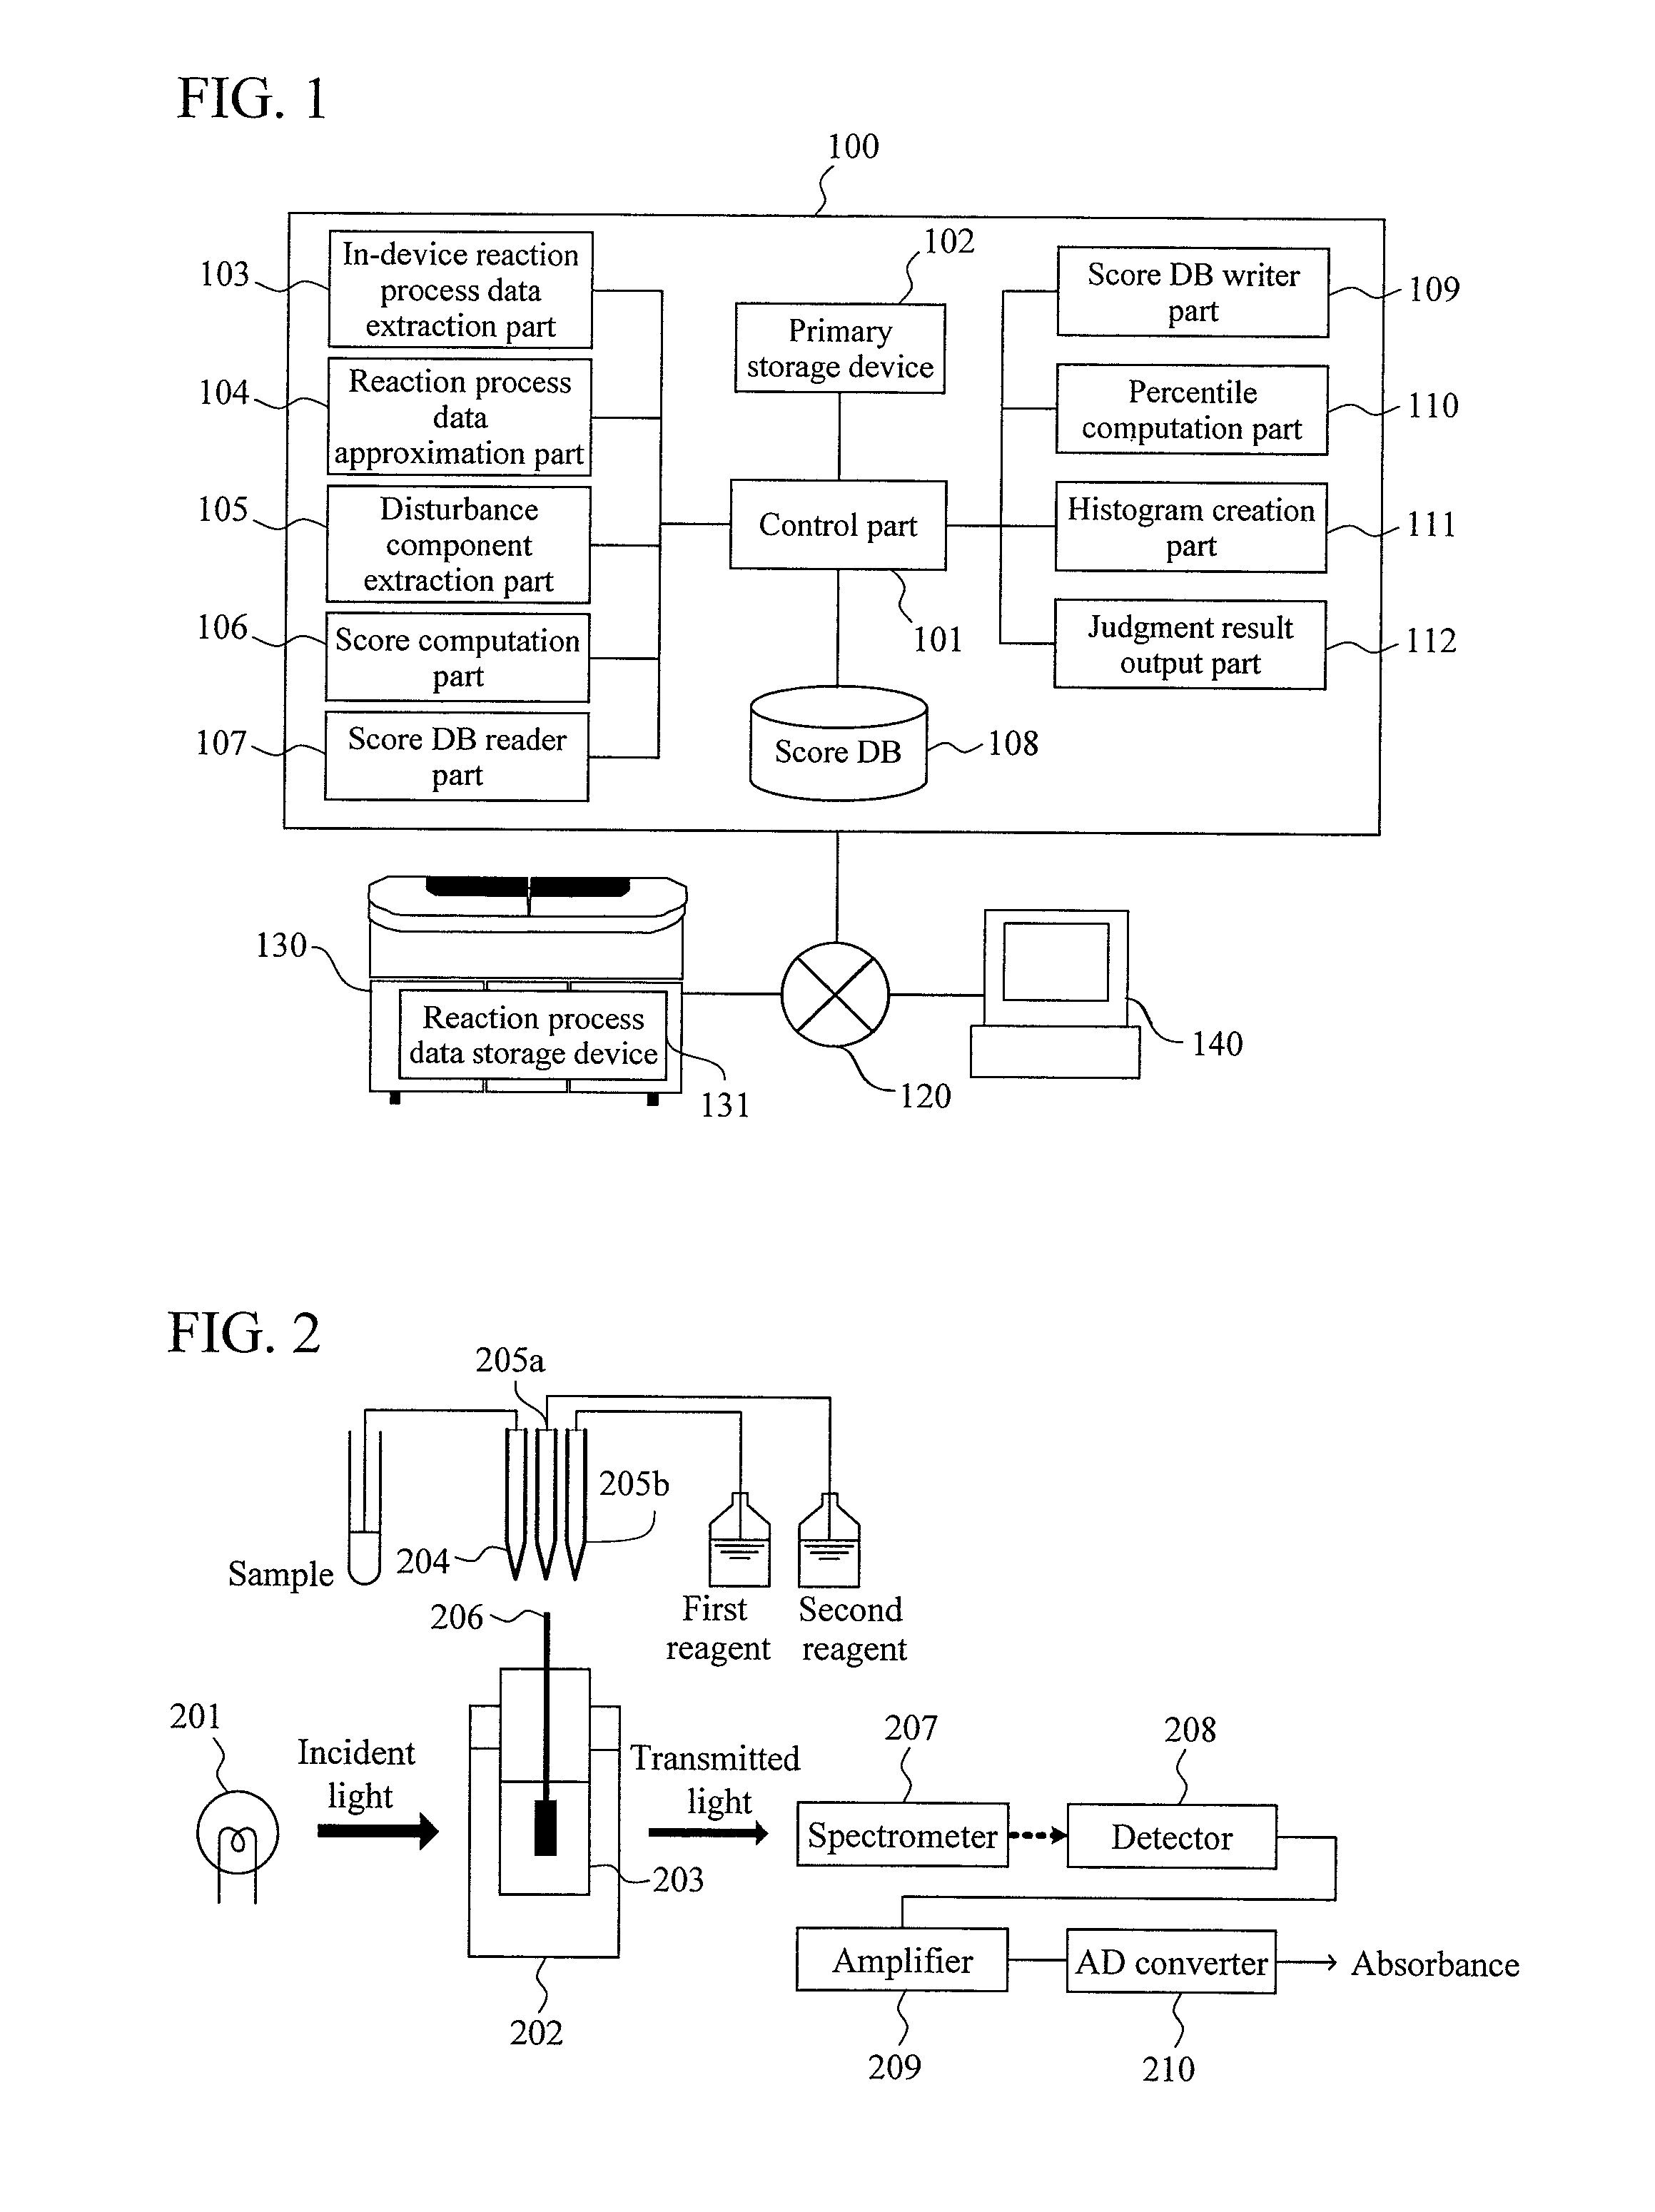 Method for assisting judgment of abnormality of reaction process data and automatic analyzer